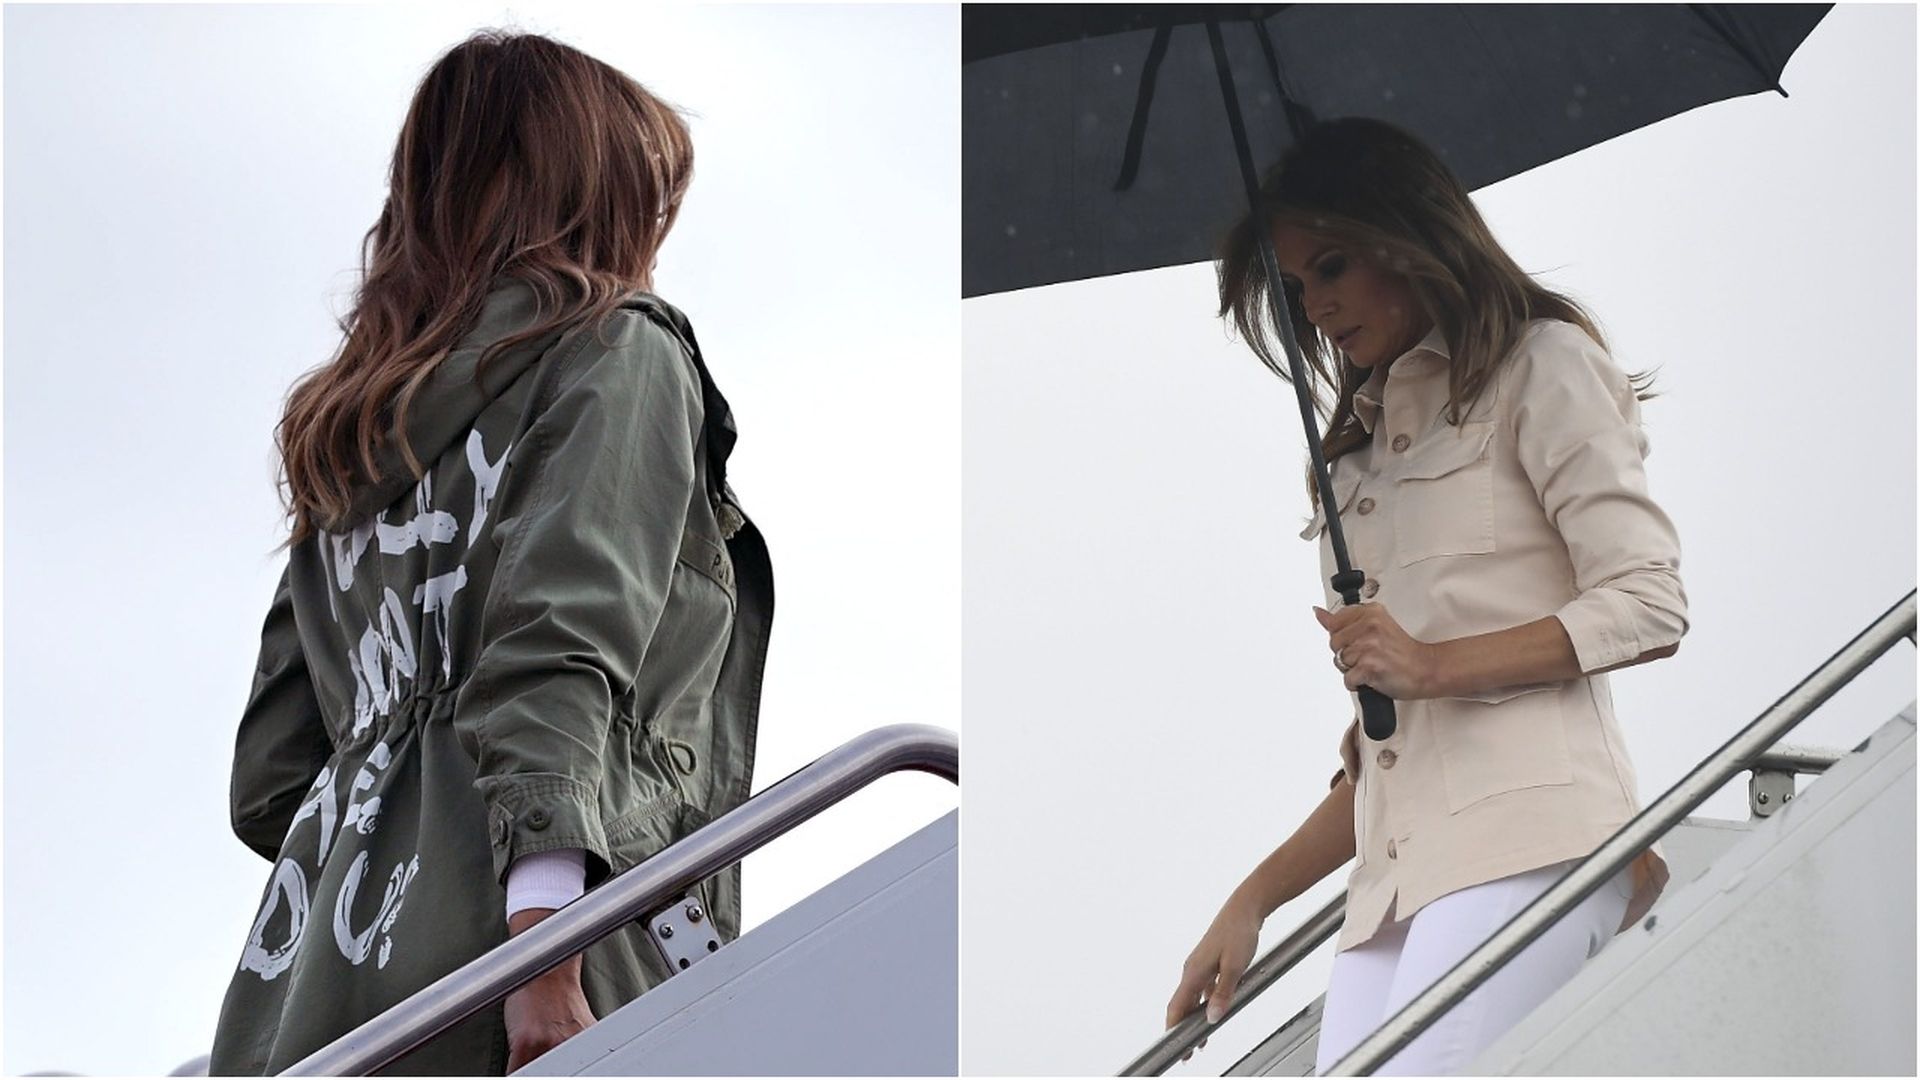 Melania Trump boarding and de-boarding the plane in different outfits. 